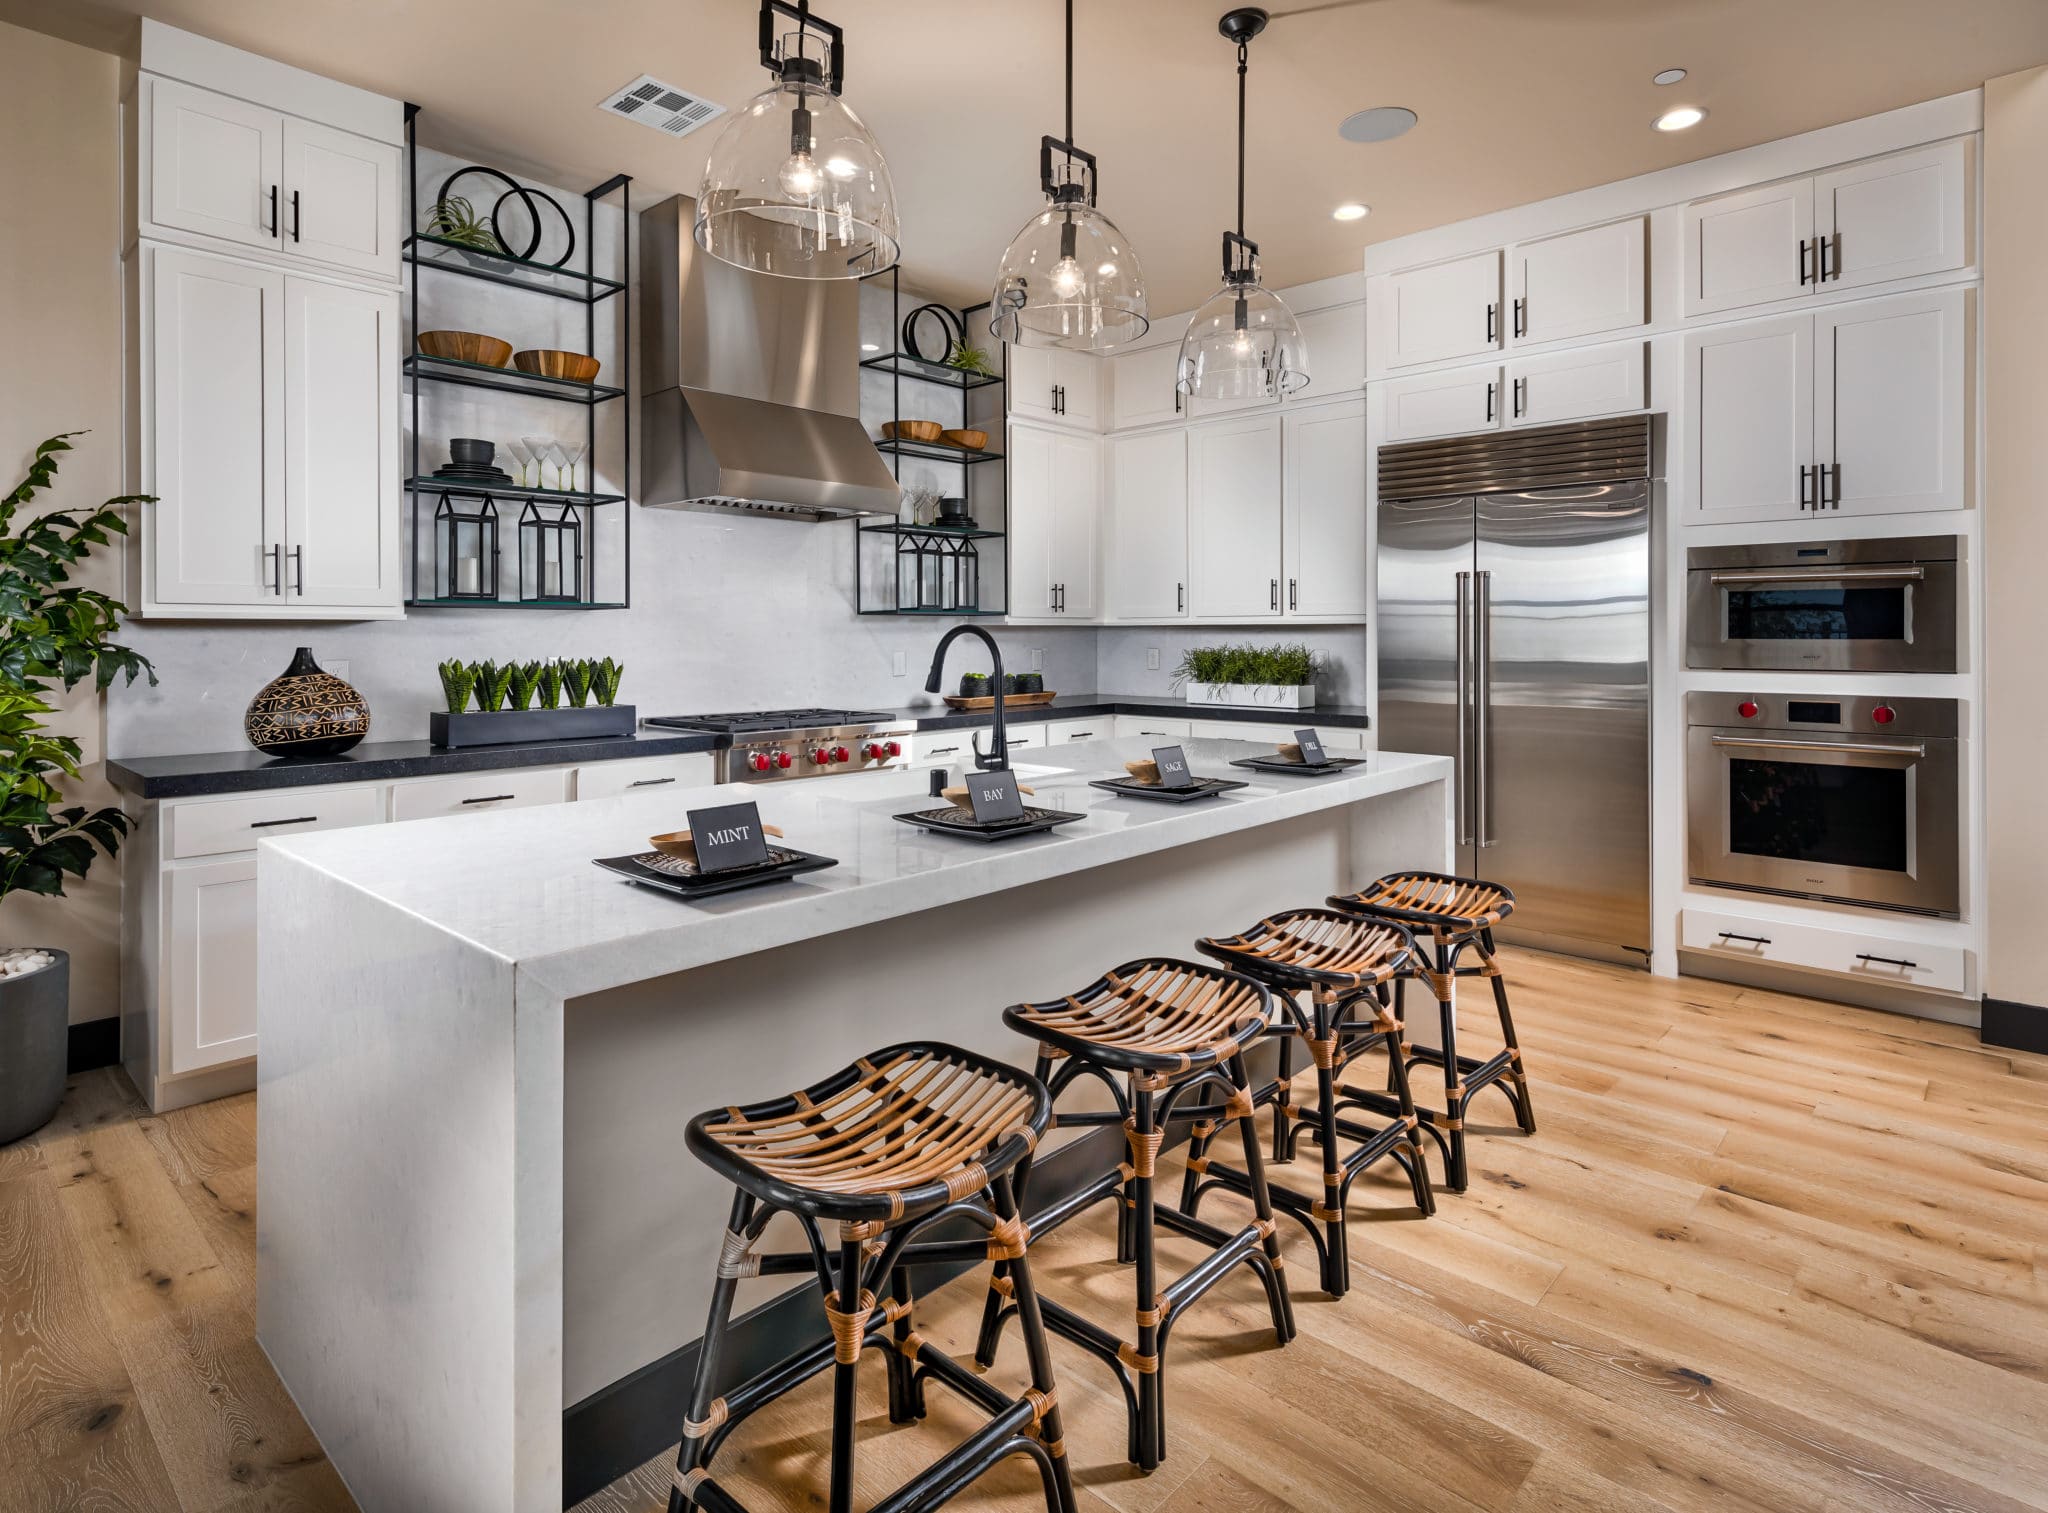 Kitchen of Torre Elite model at Acadia Ridge by Toll Brothers